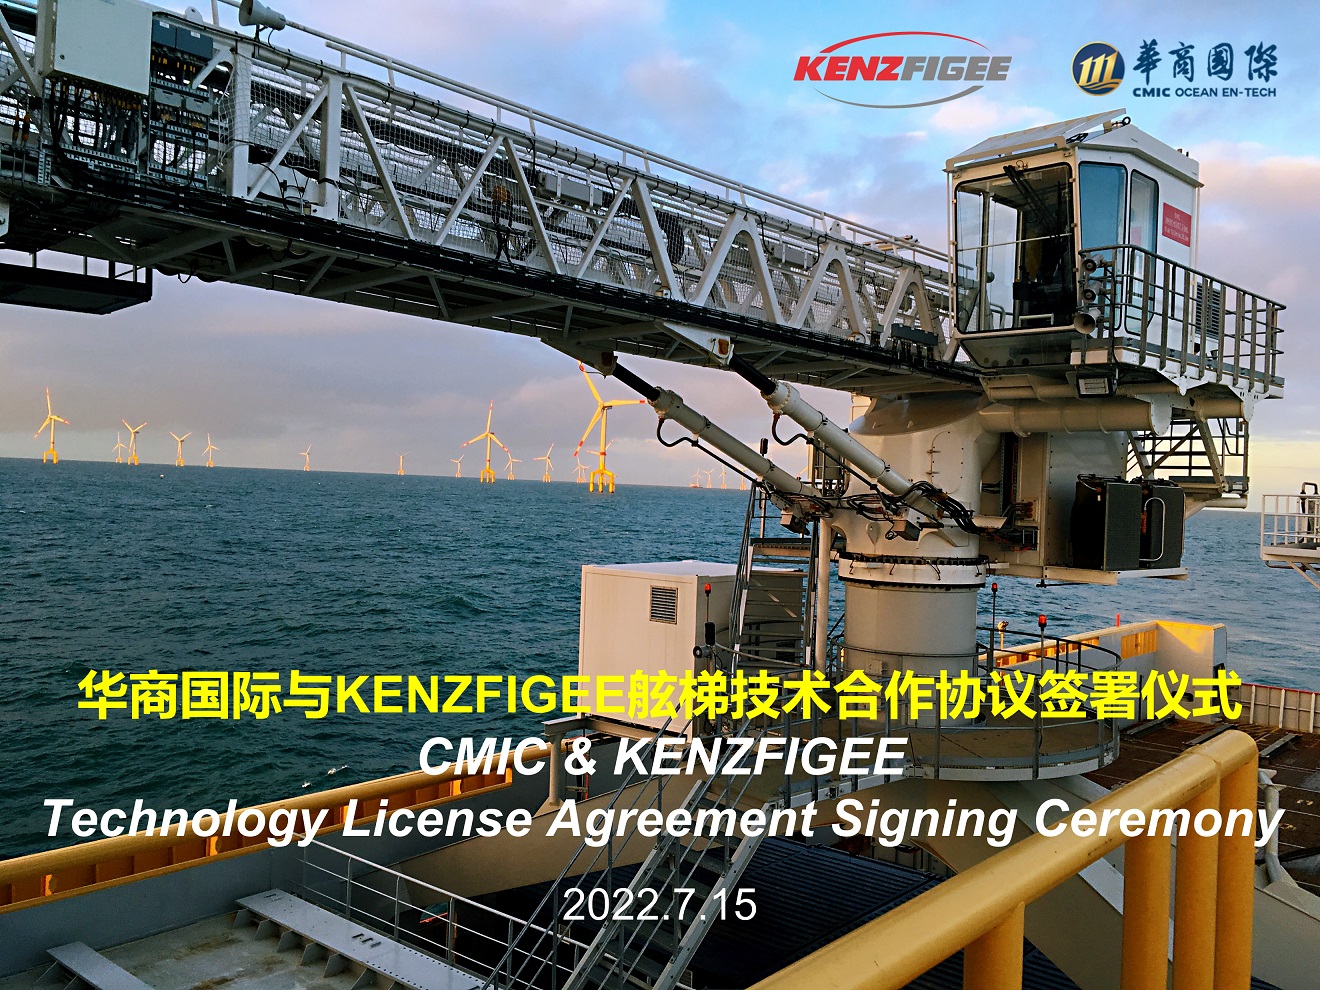 CMIC and KenzFigee sign technology license agreement